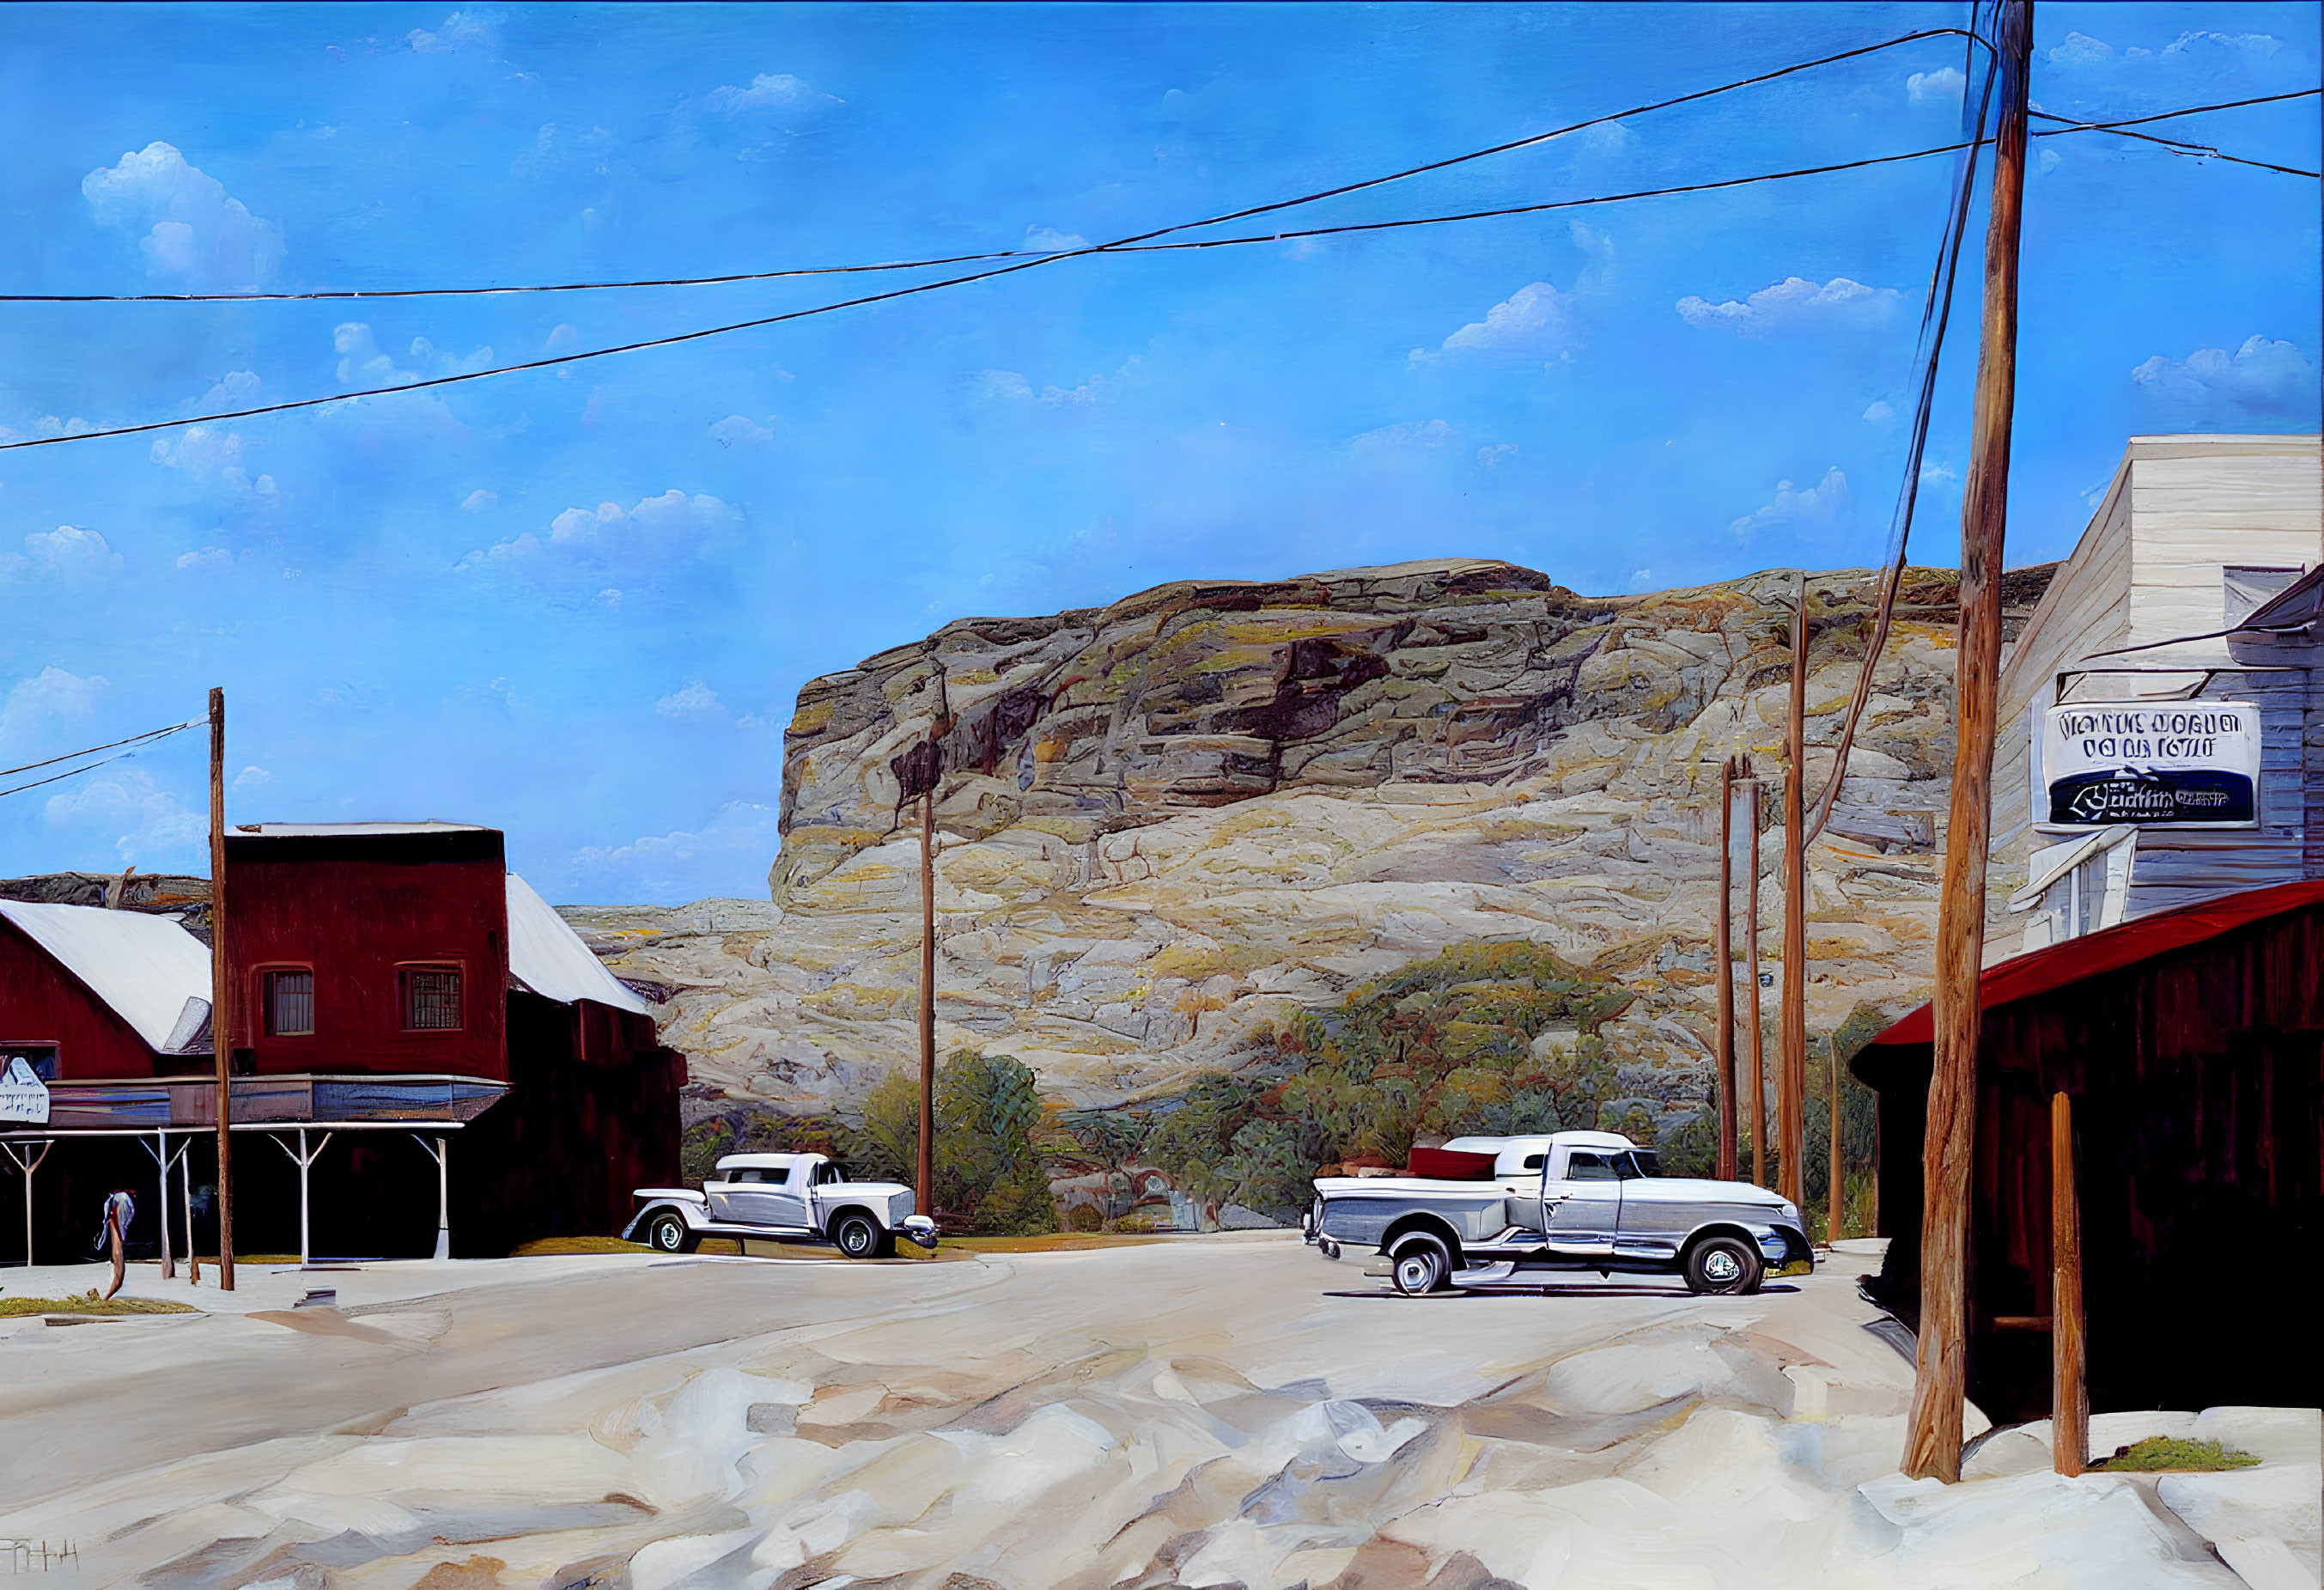 Vintage cars and rustic buildings in a serene street scene with a towering cliff backdrop.